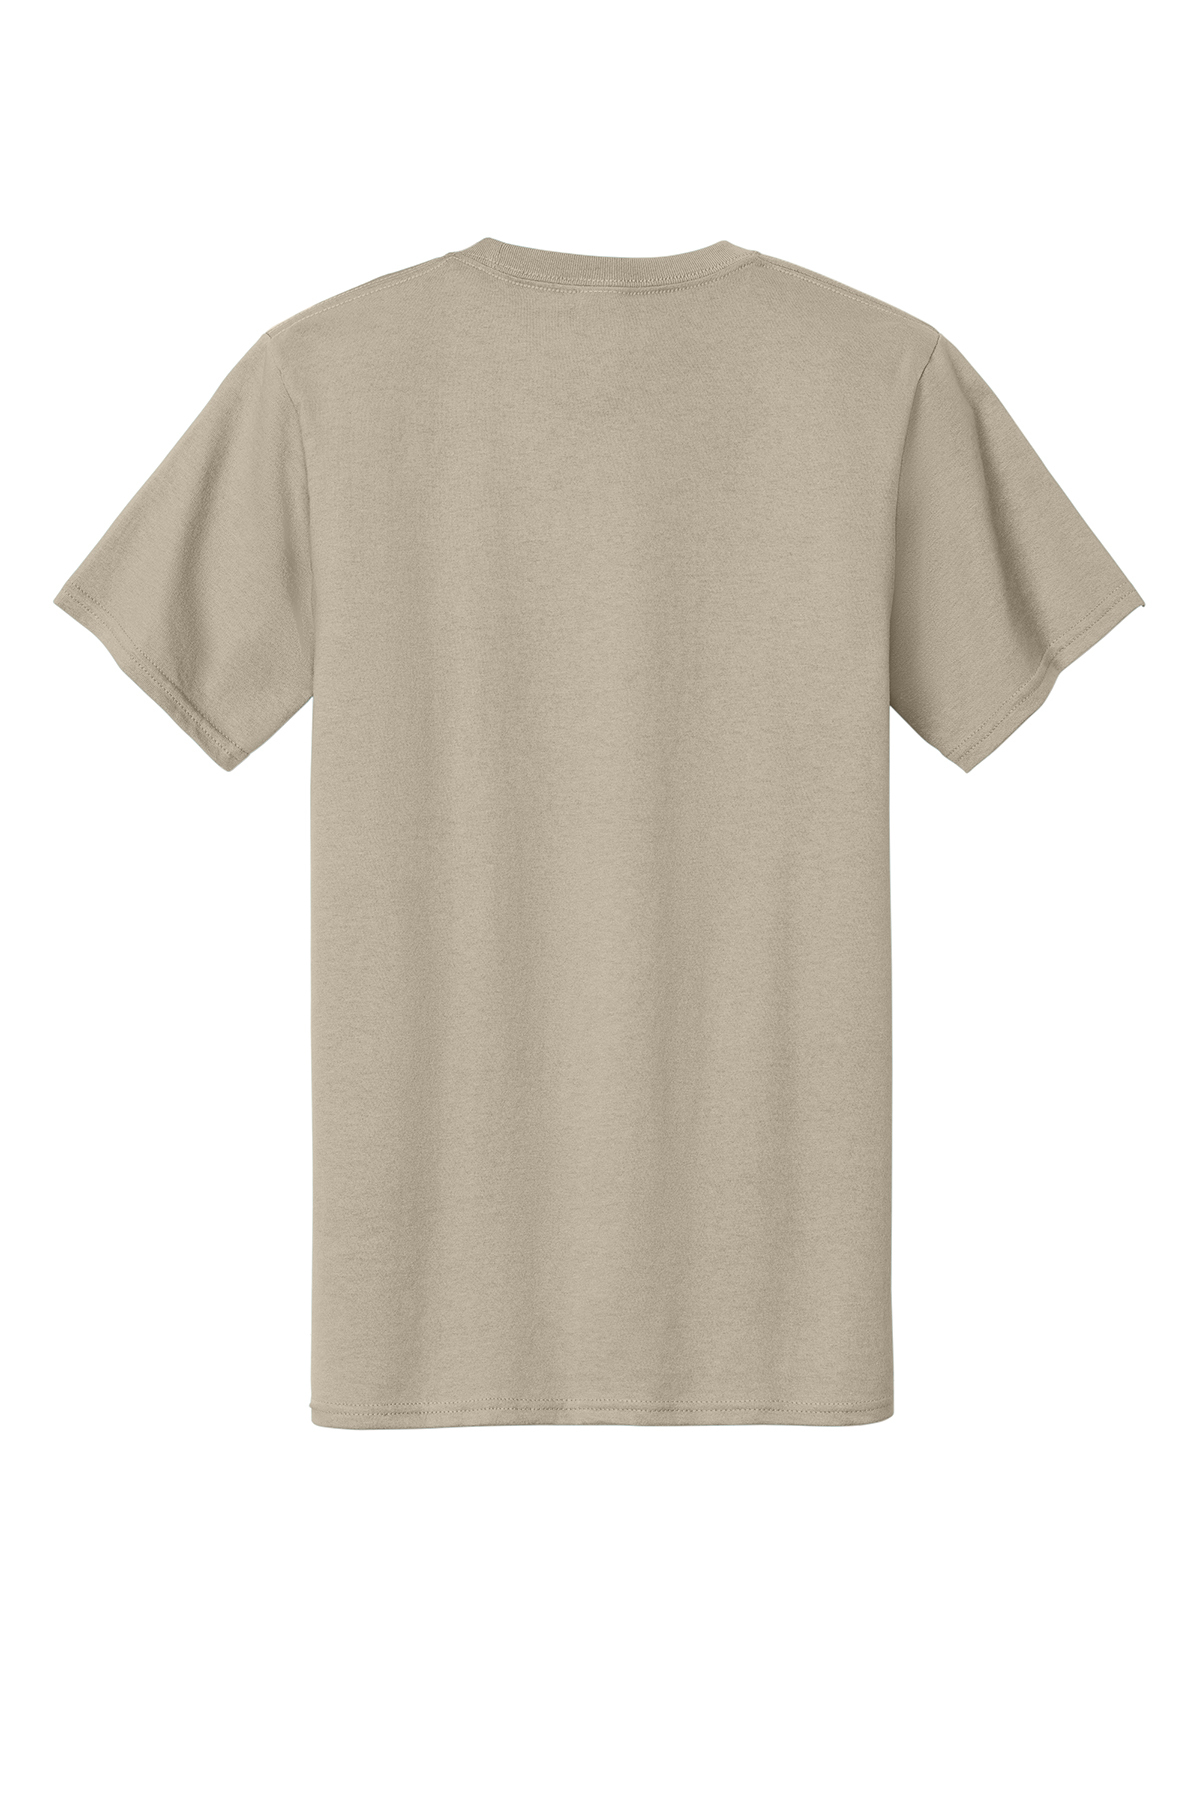 Port & Company Essential Tee | Product | Company Casuals